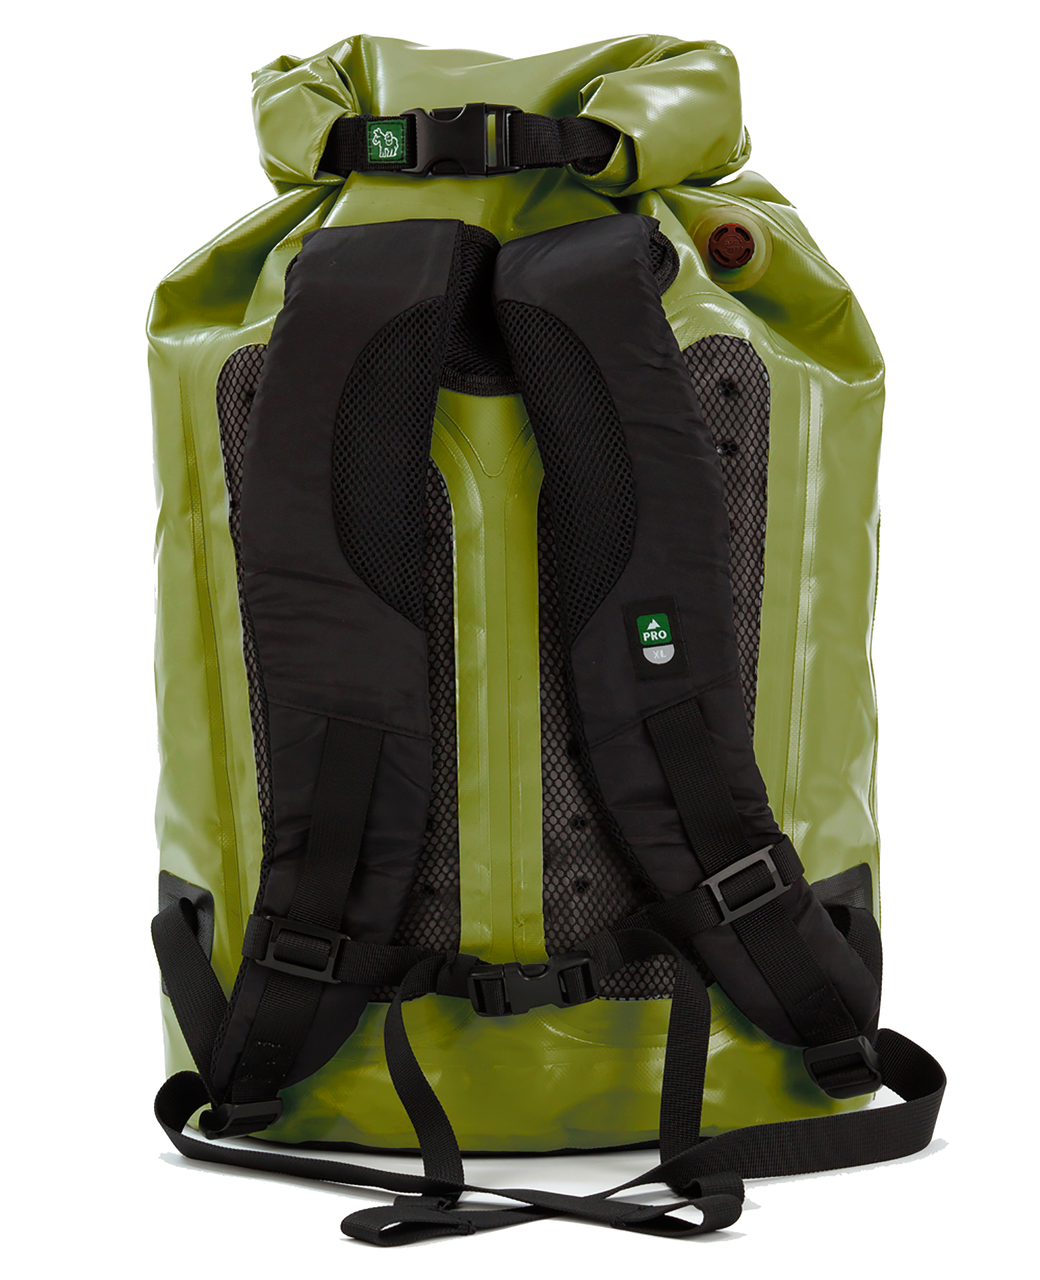 icemule-pro-seagreen-insulated-backpack-cooler-back-view